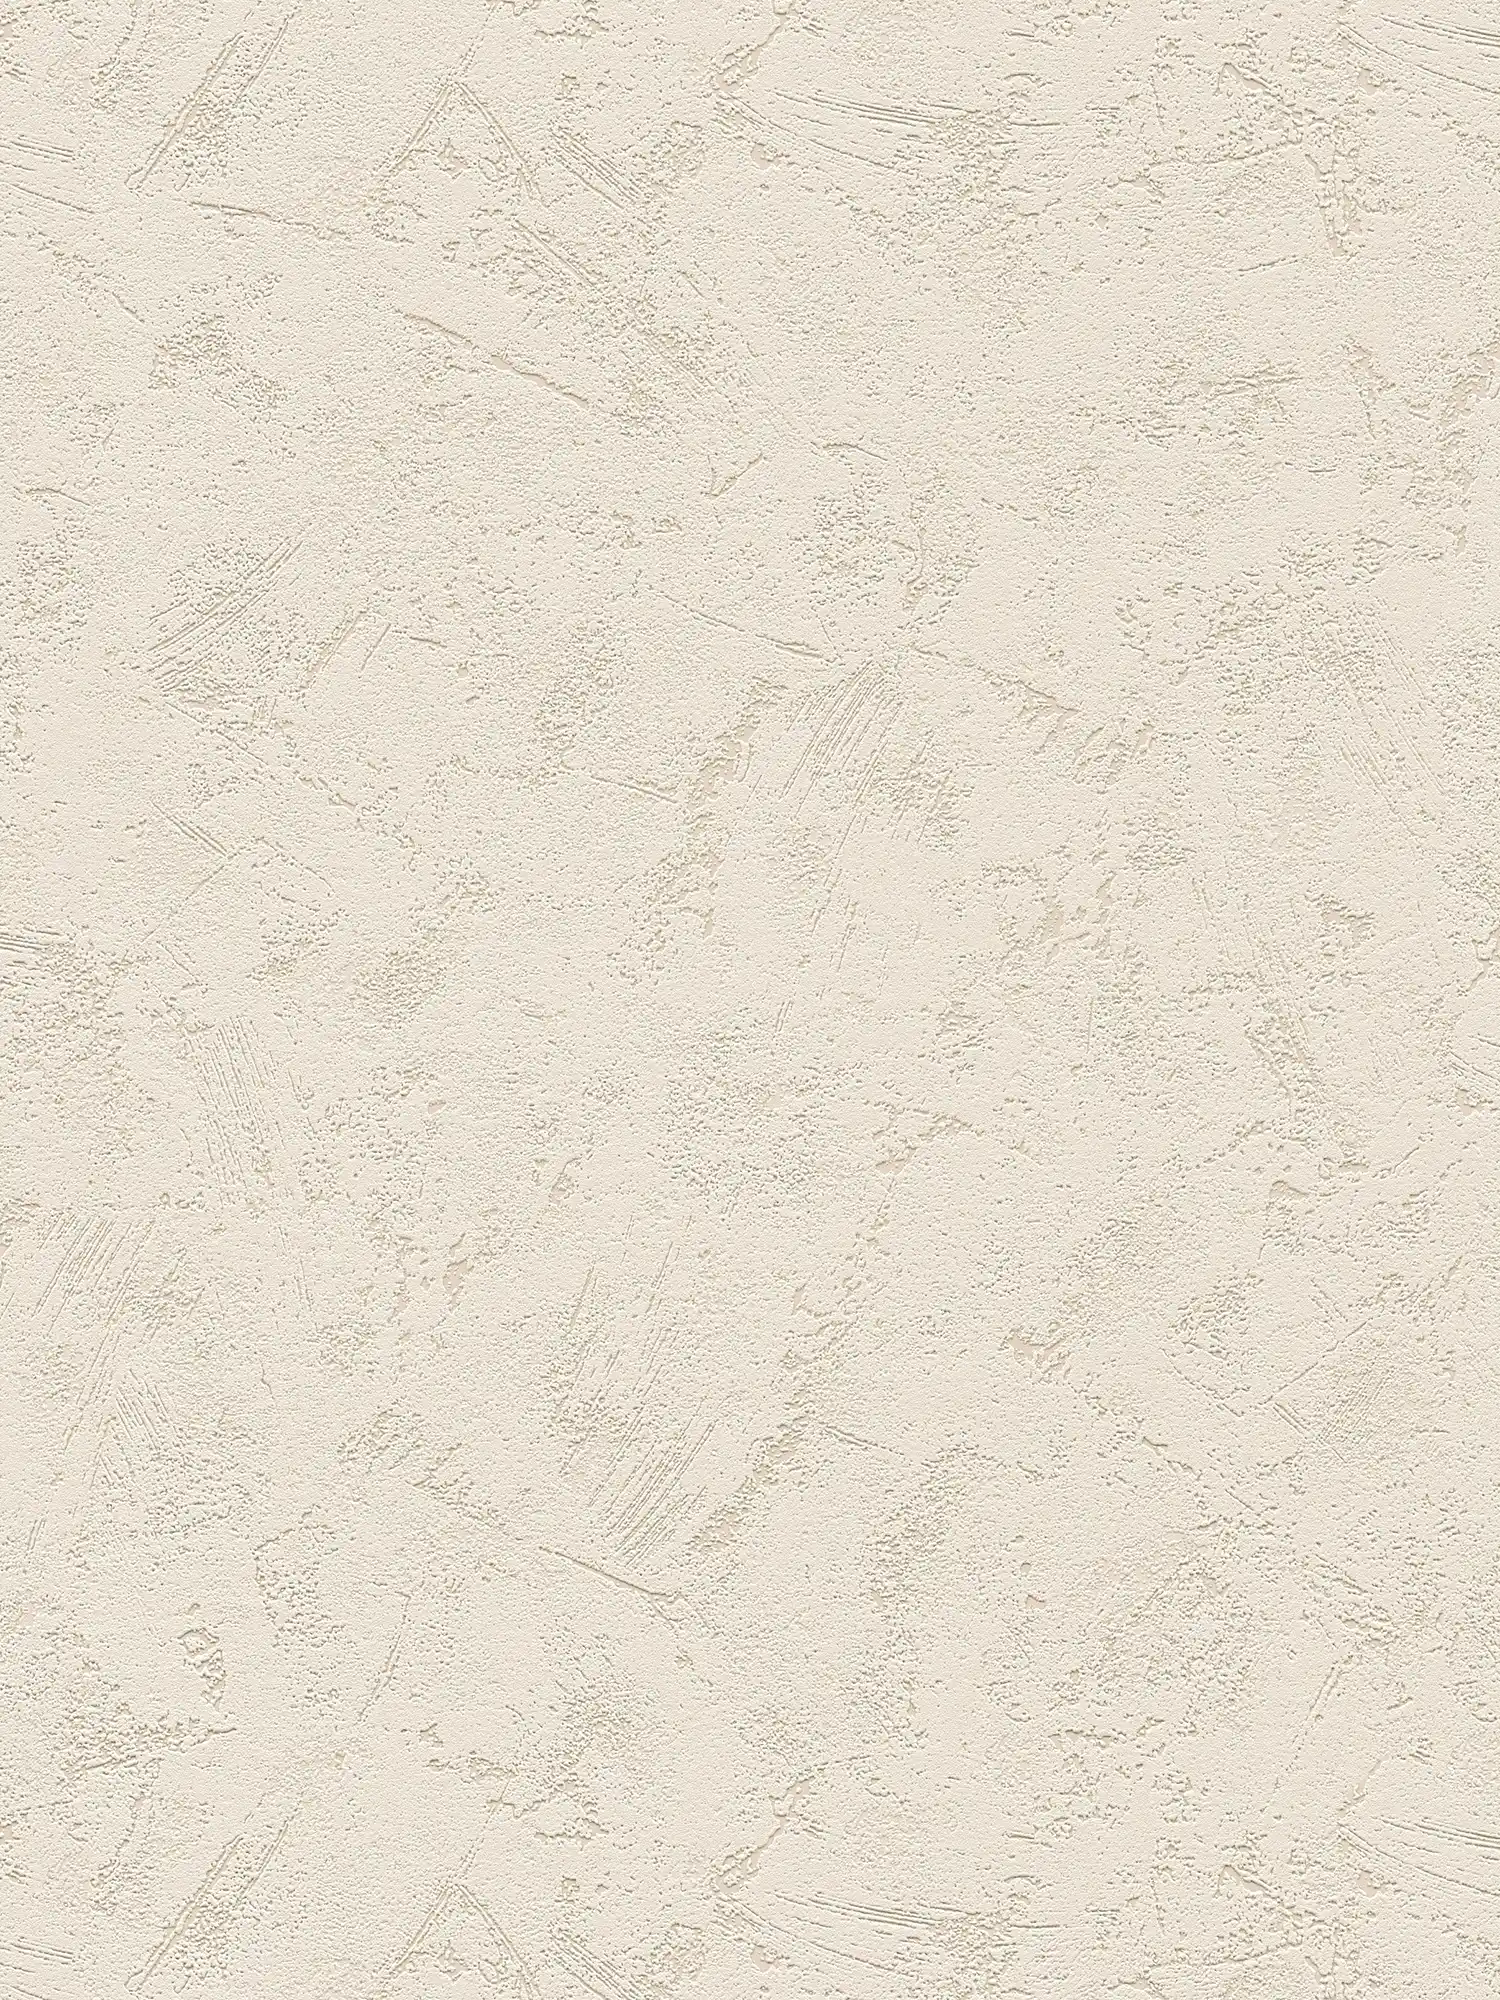 Putzoptk wallpaper with wiping plaster foam structure - beige
